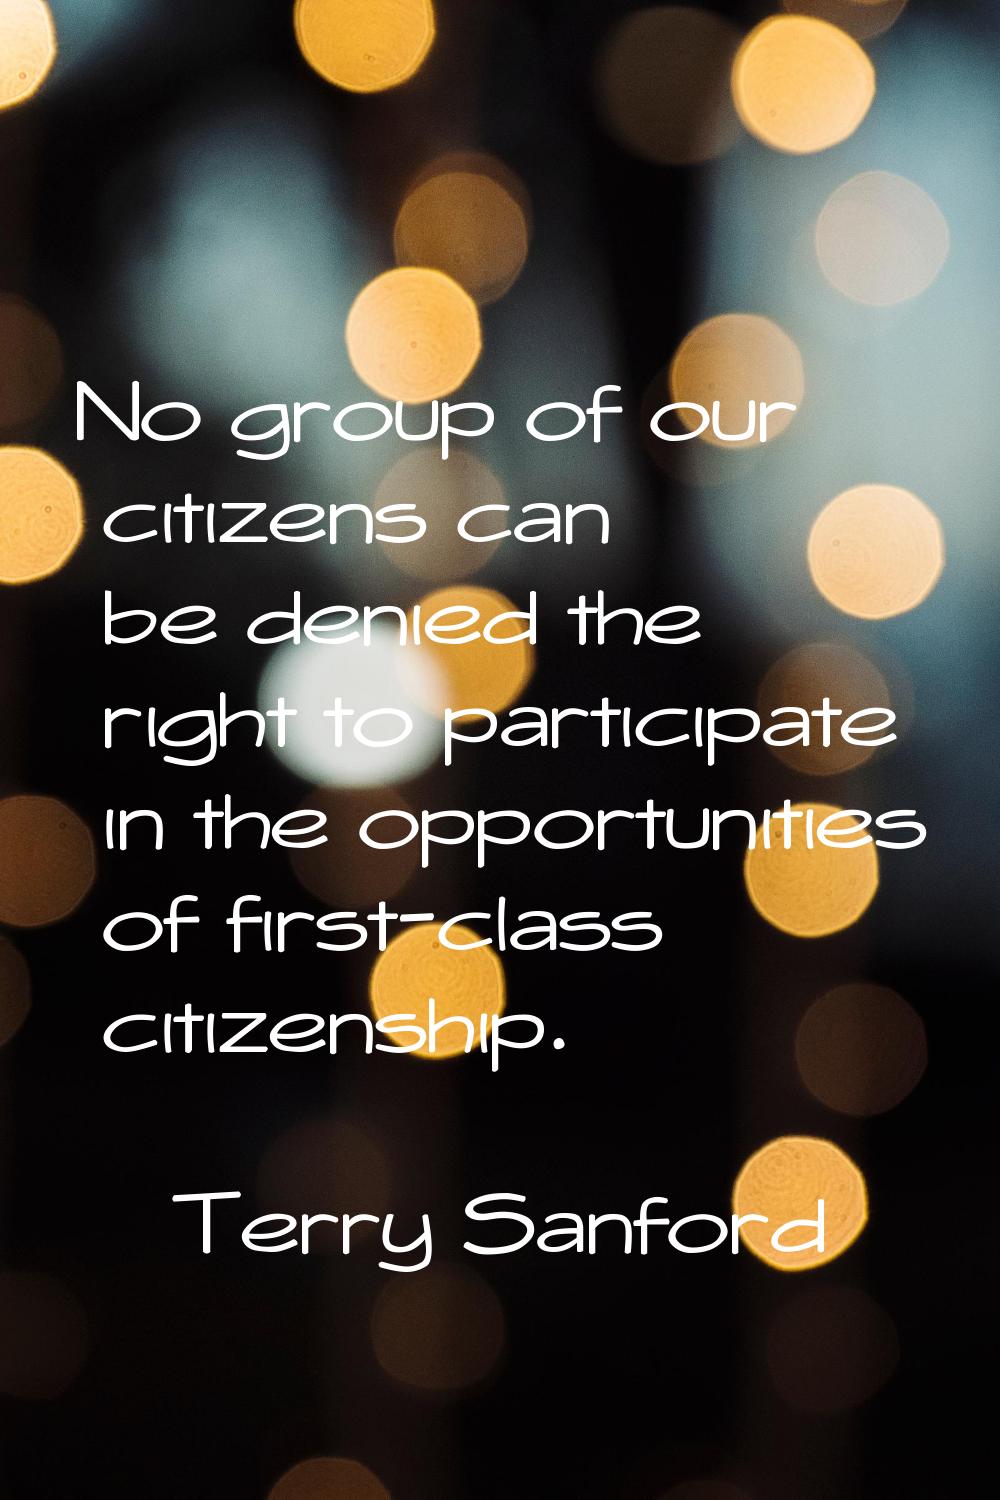 No group of our citizens can be denied the right to participate in the opportunities of first-class